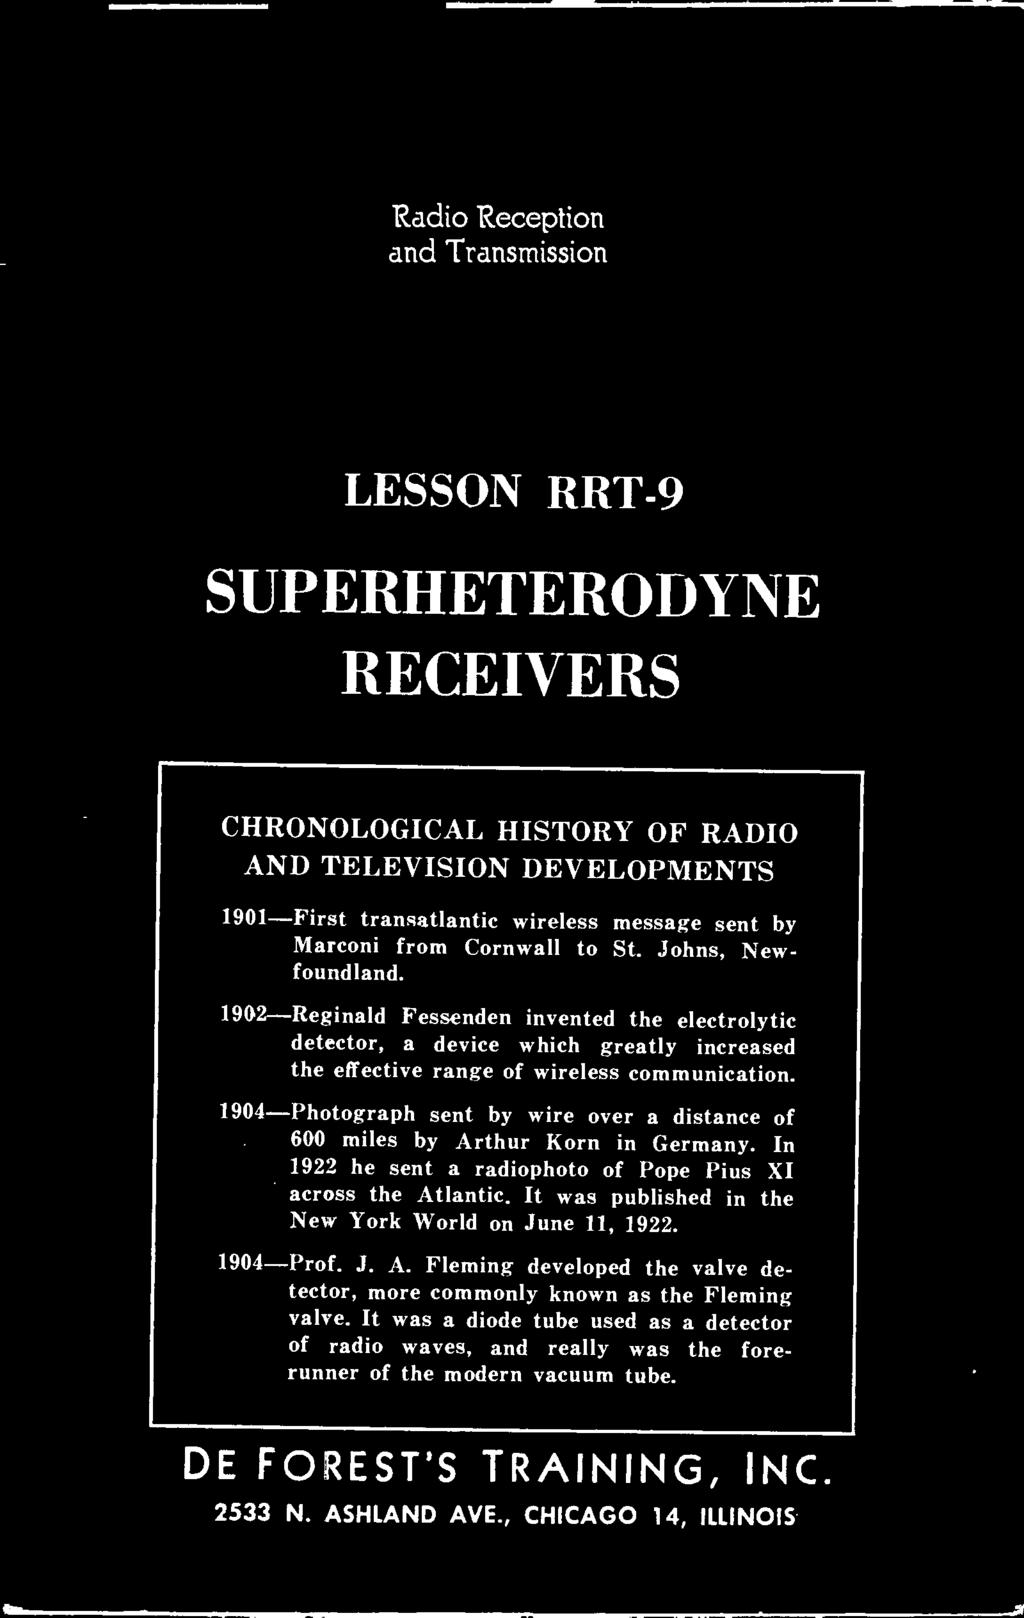 Radio Reception and Transmission LESSON RRT -9 SUPERHETERODYNE RECEIVERS CHRONOLOGICAL HISTORY OF RADIO AND TELEVISION DEVELOPMENTS 1901 -First transatlantic wireless message sent by Marconi from